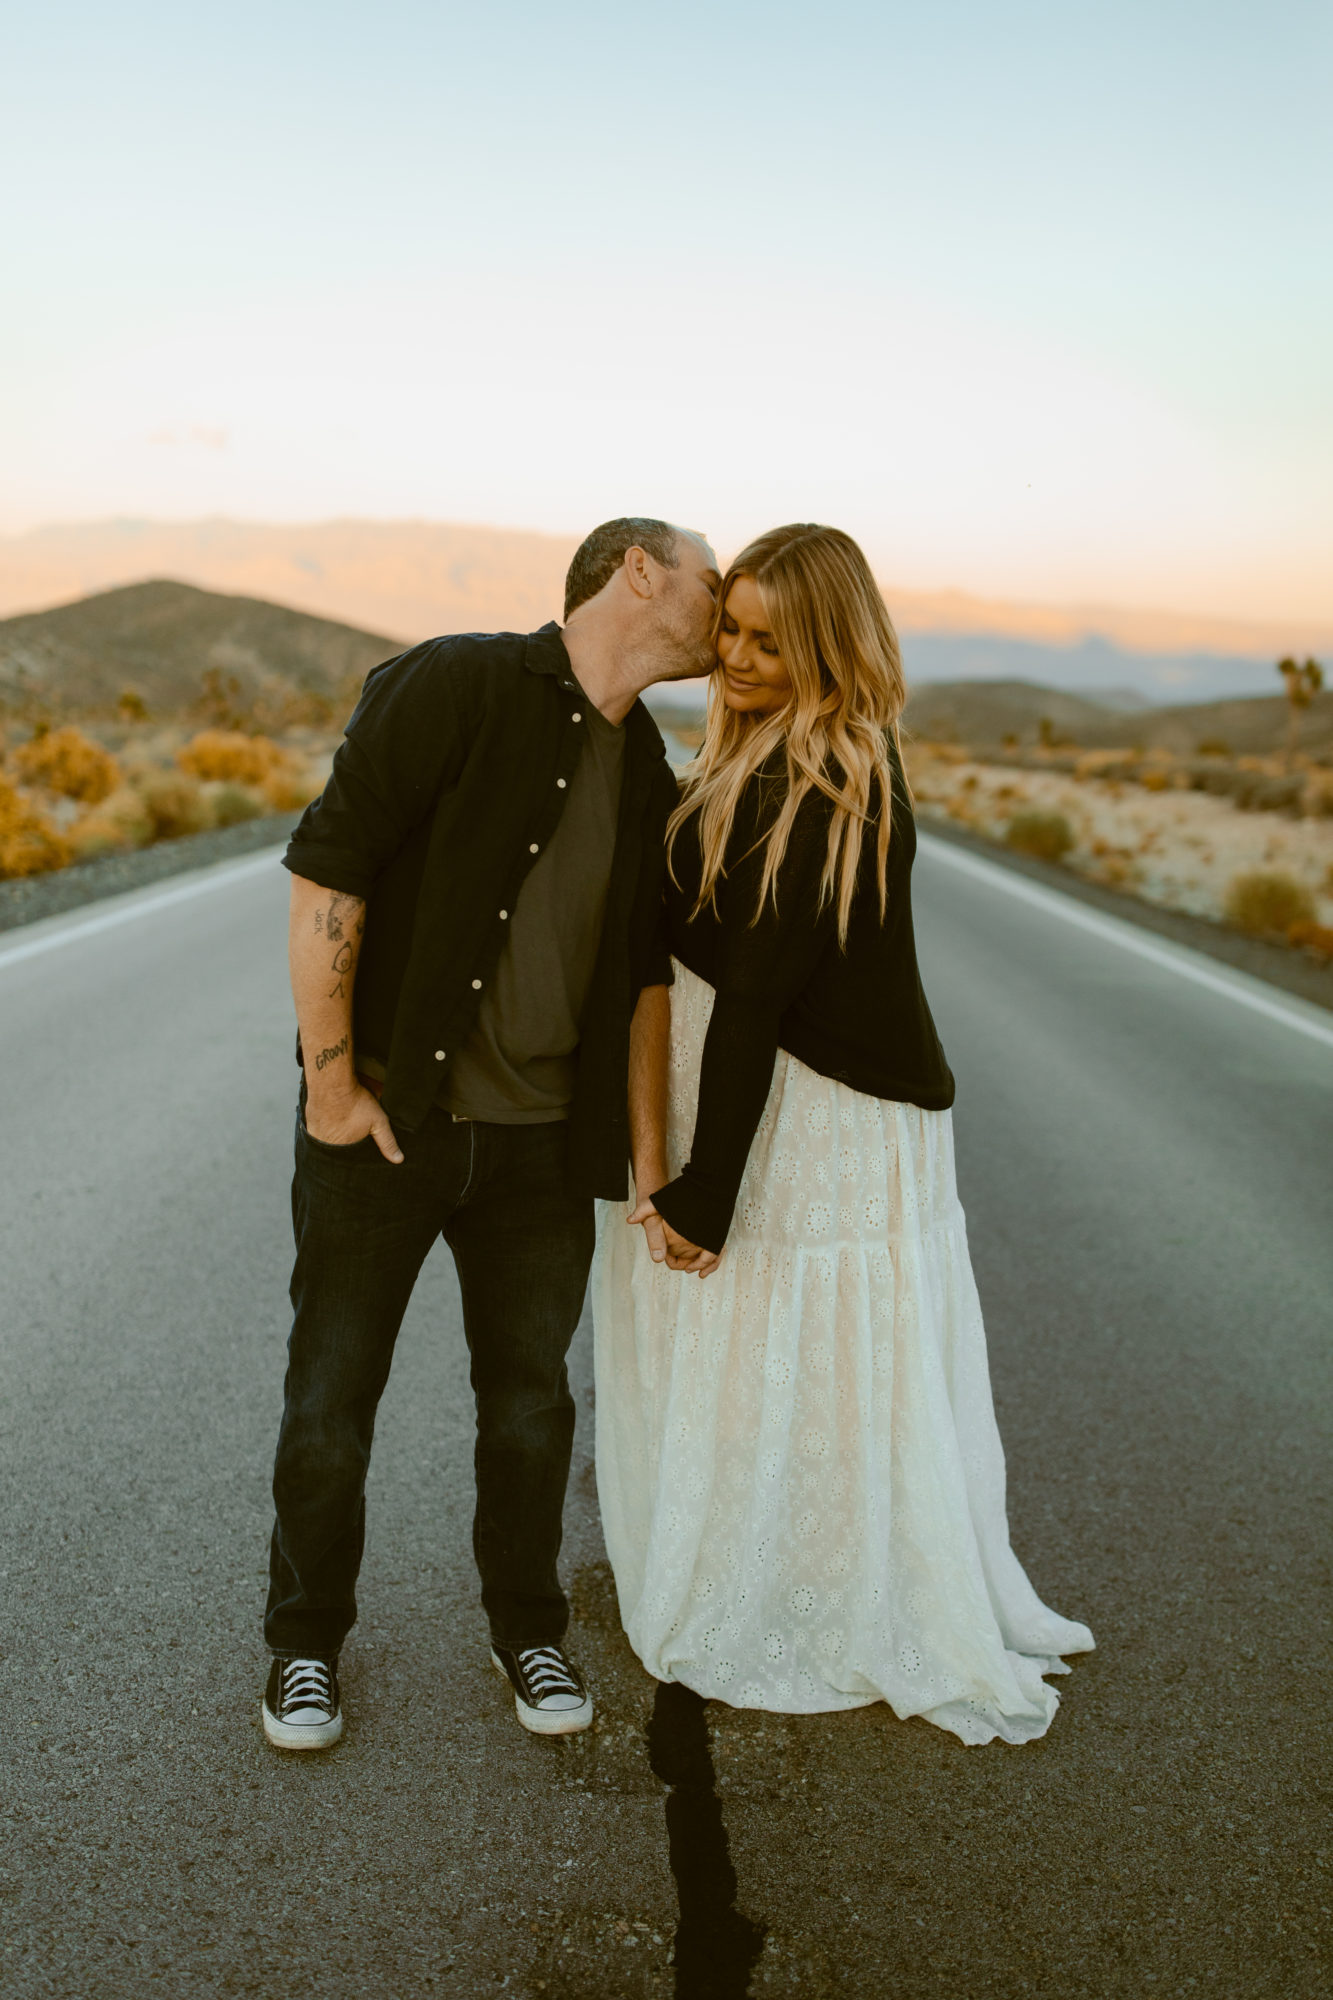 Man and woman posing in road for desert photoshoot 